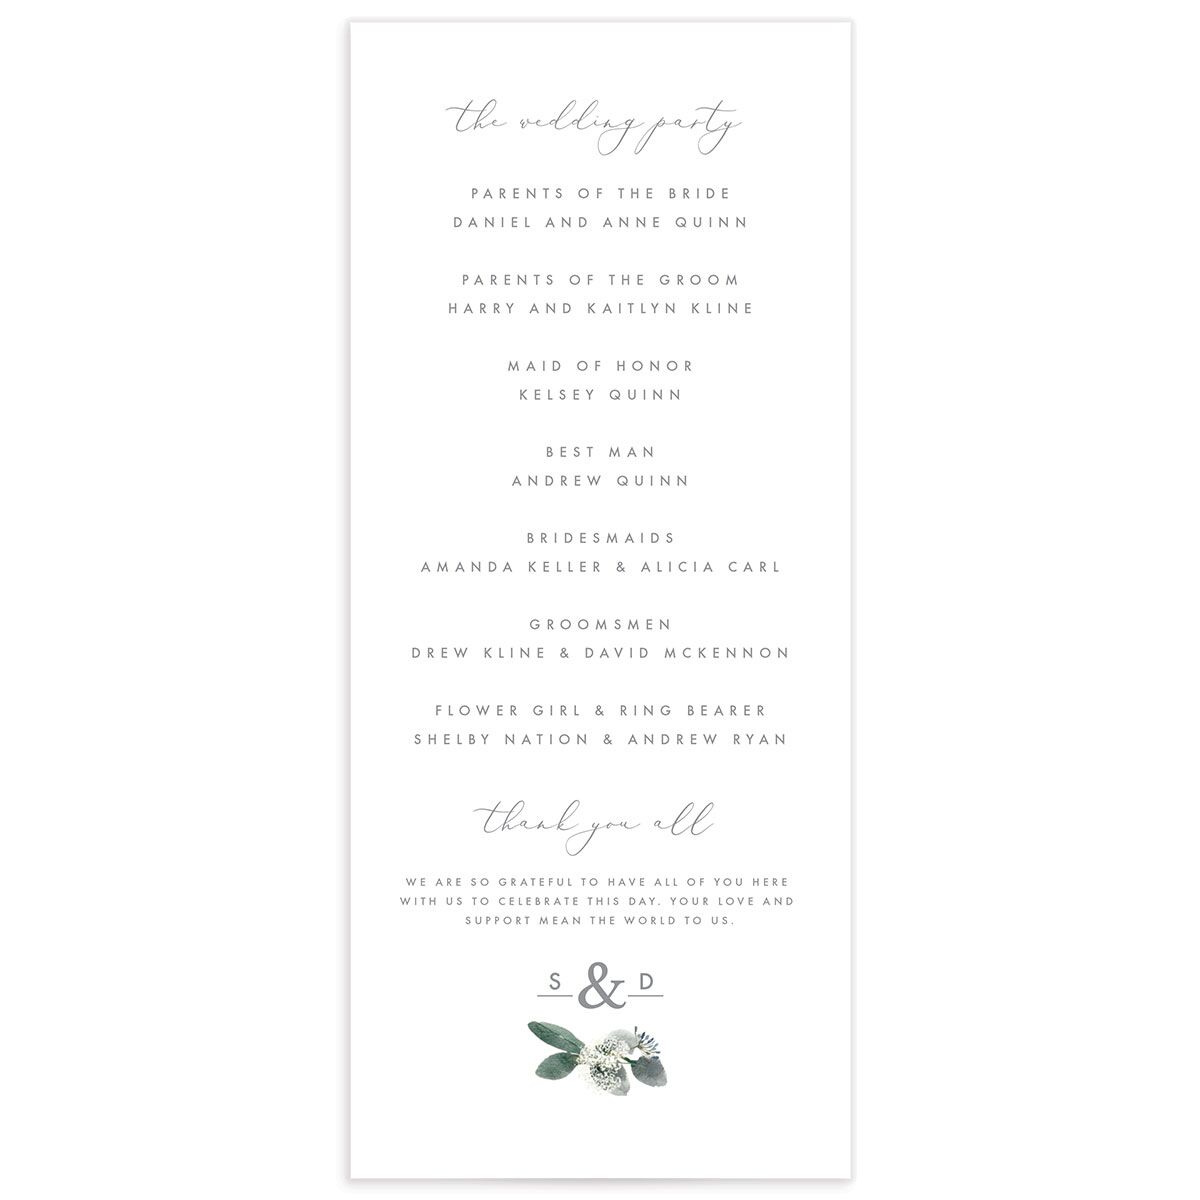 Earthy Flora Wedding Programs back in Pure White